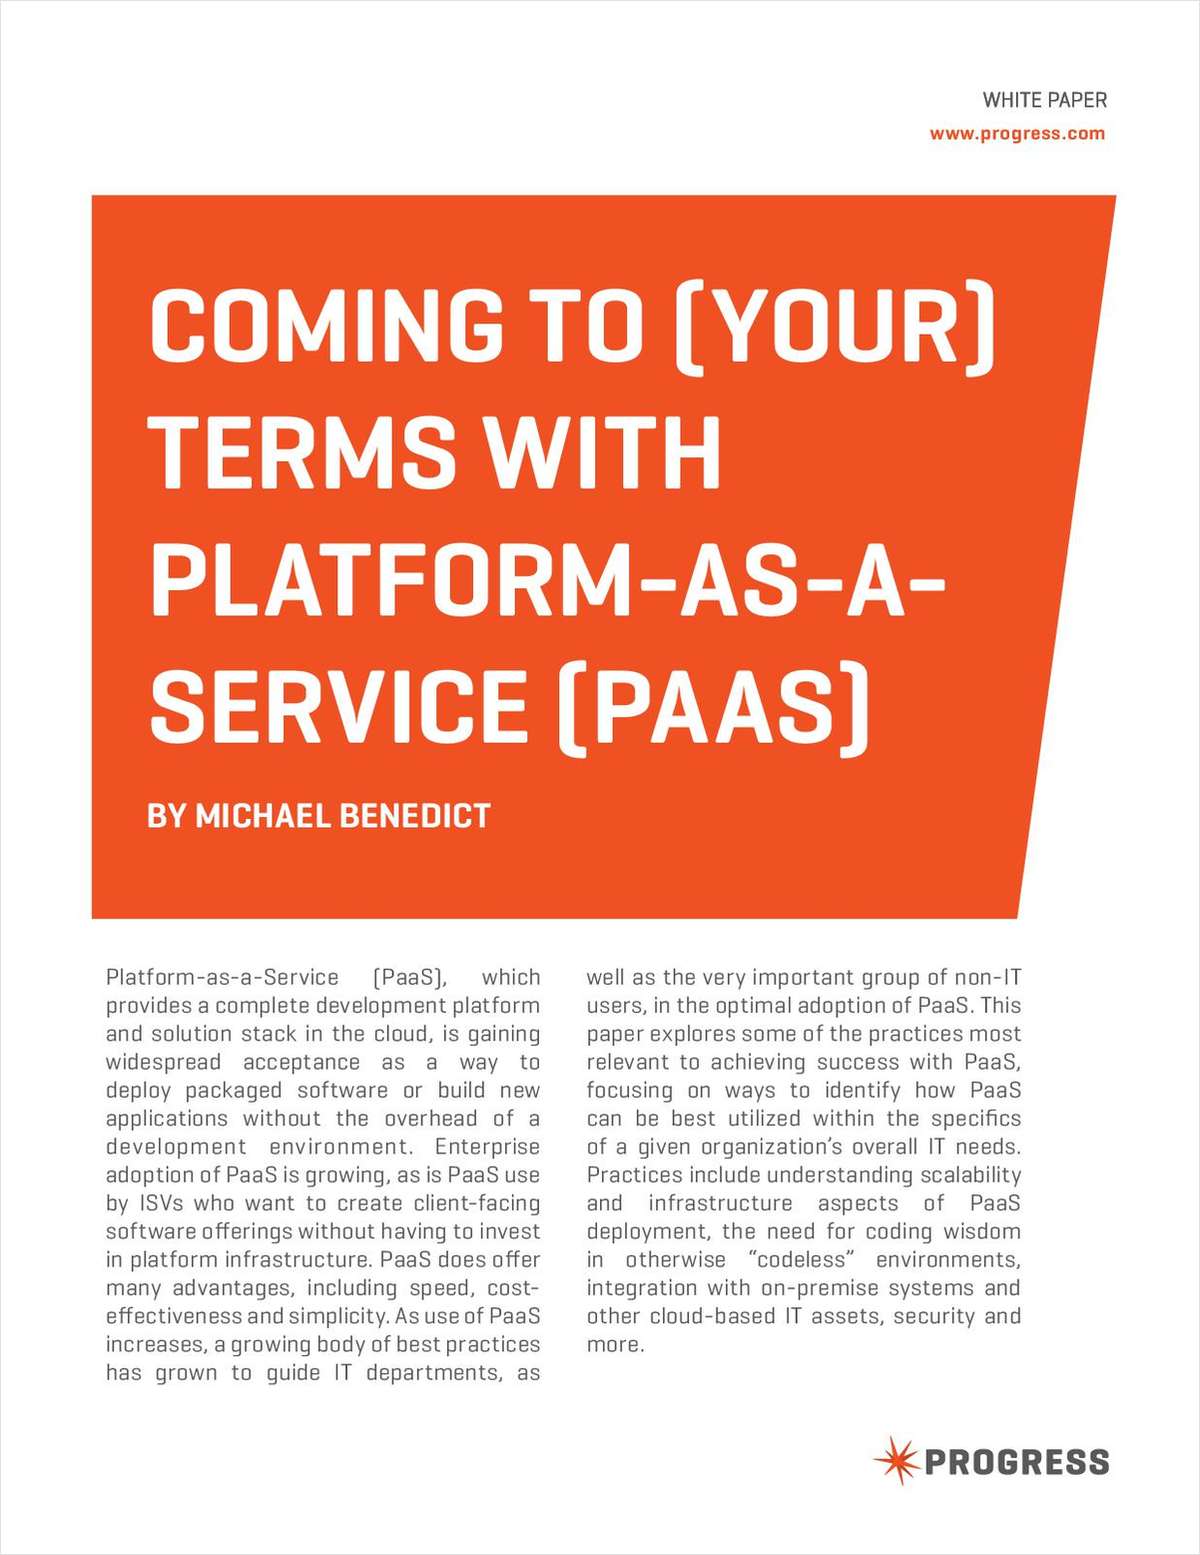 Coming to Terms with Platform as a Service